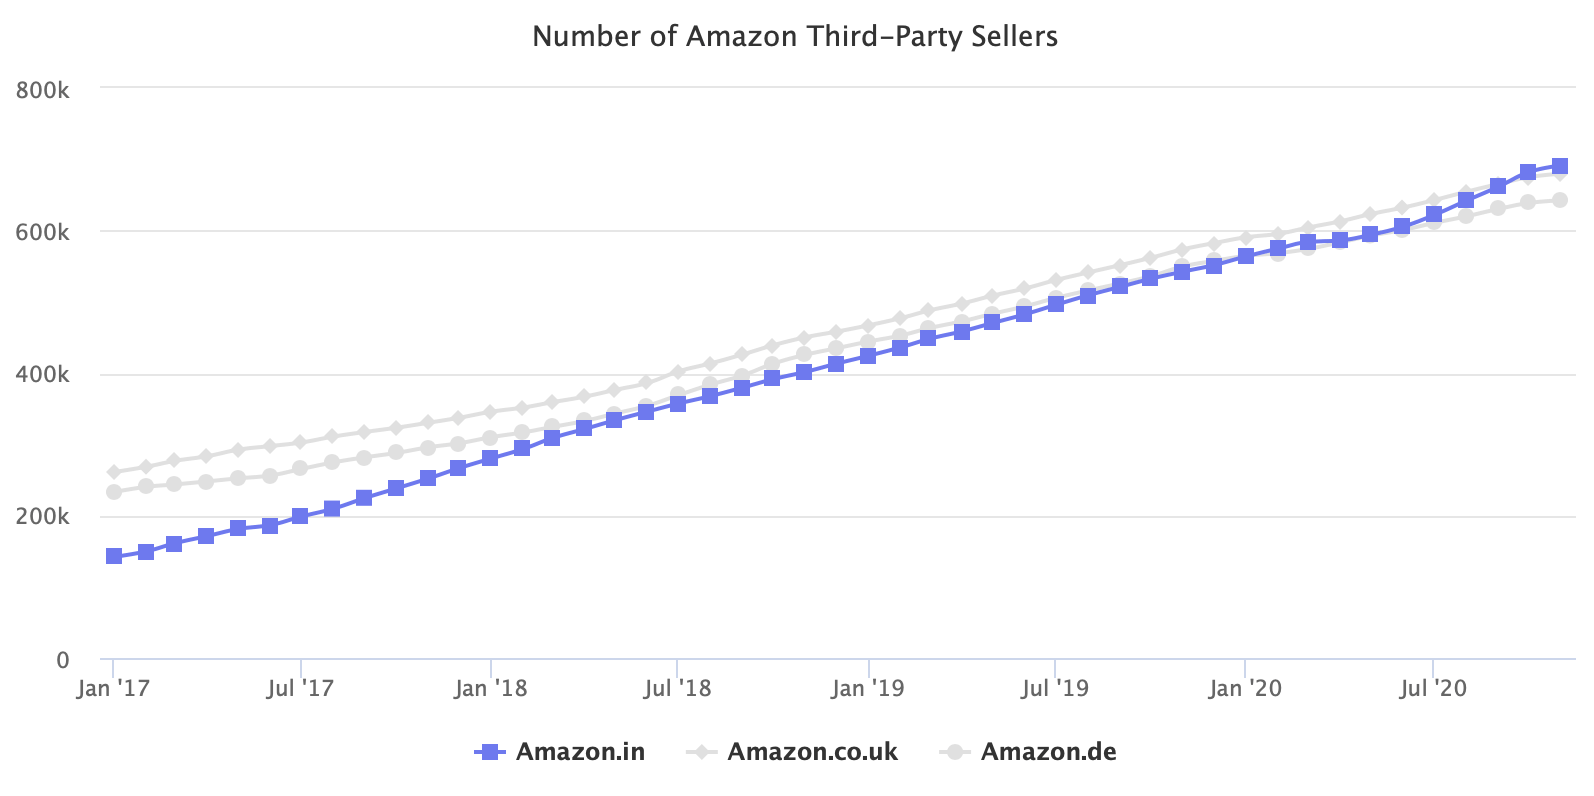 Number of Amazon Third-Party Sellers